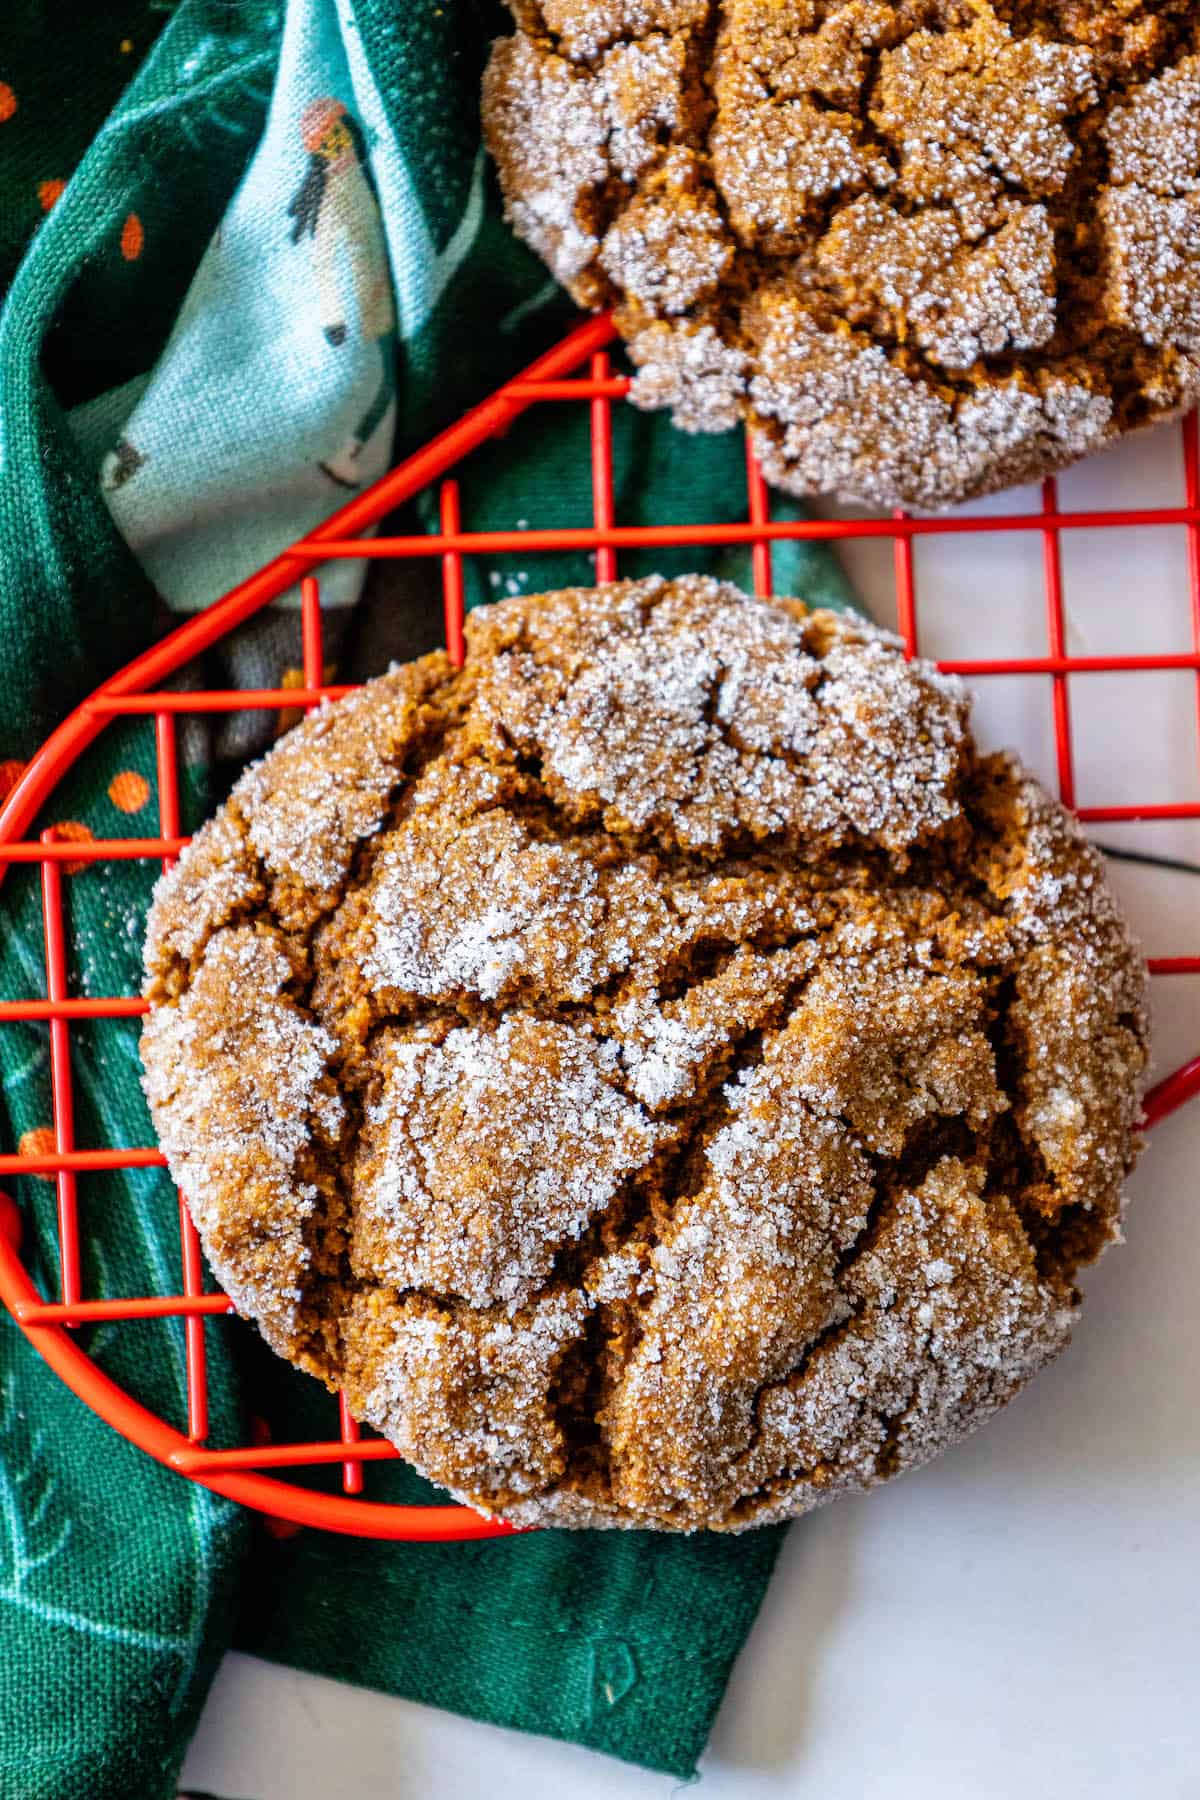 Keywords: soft gingersnap cookies recipe, molasses cookies
Description: Two molasses cookies cooling on a rack.